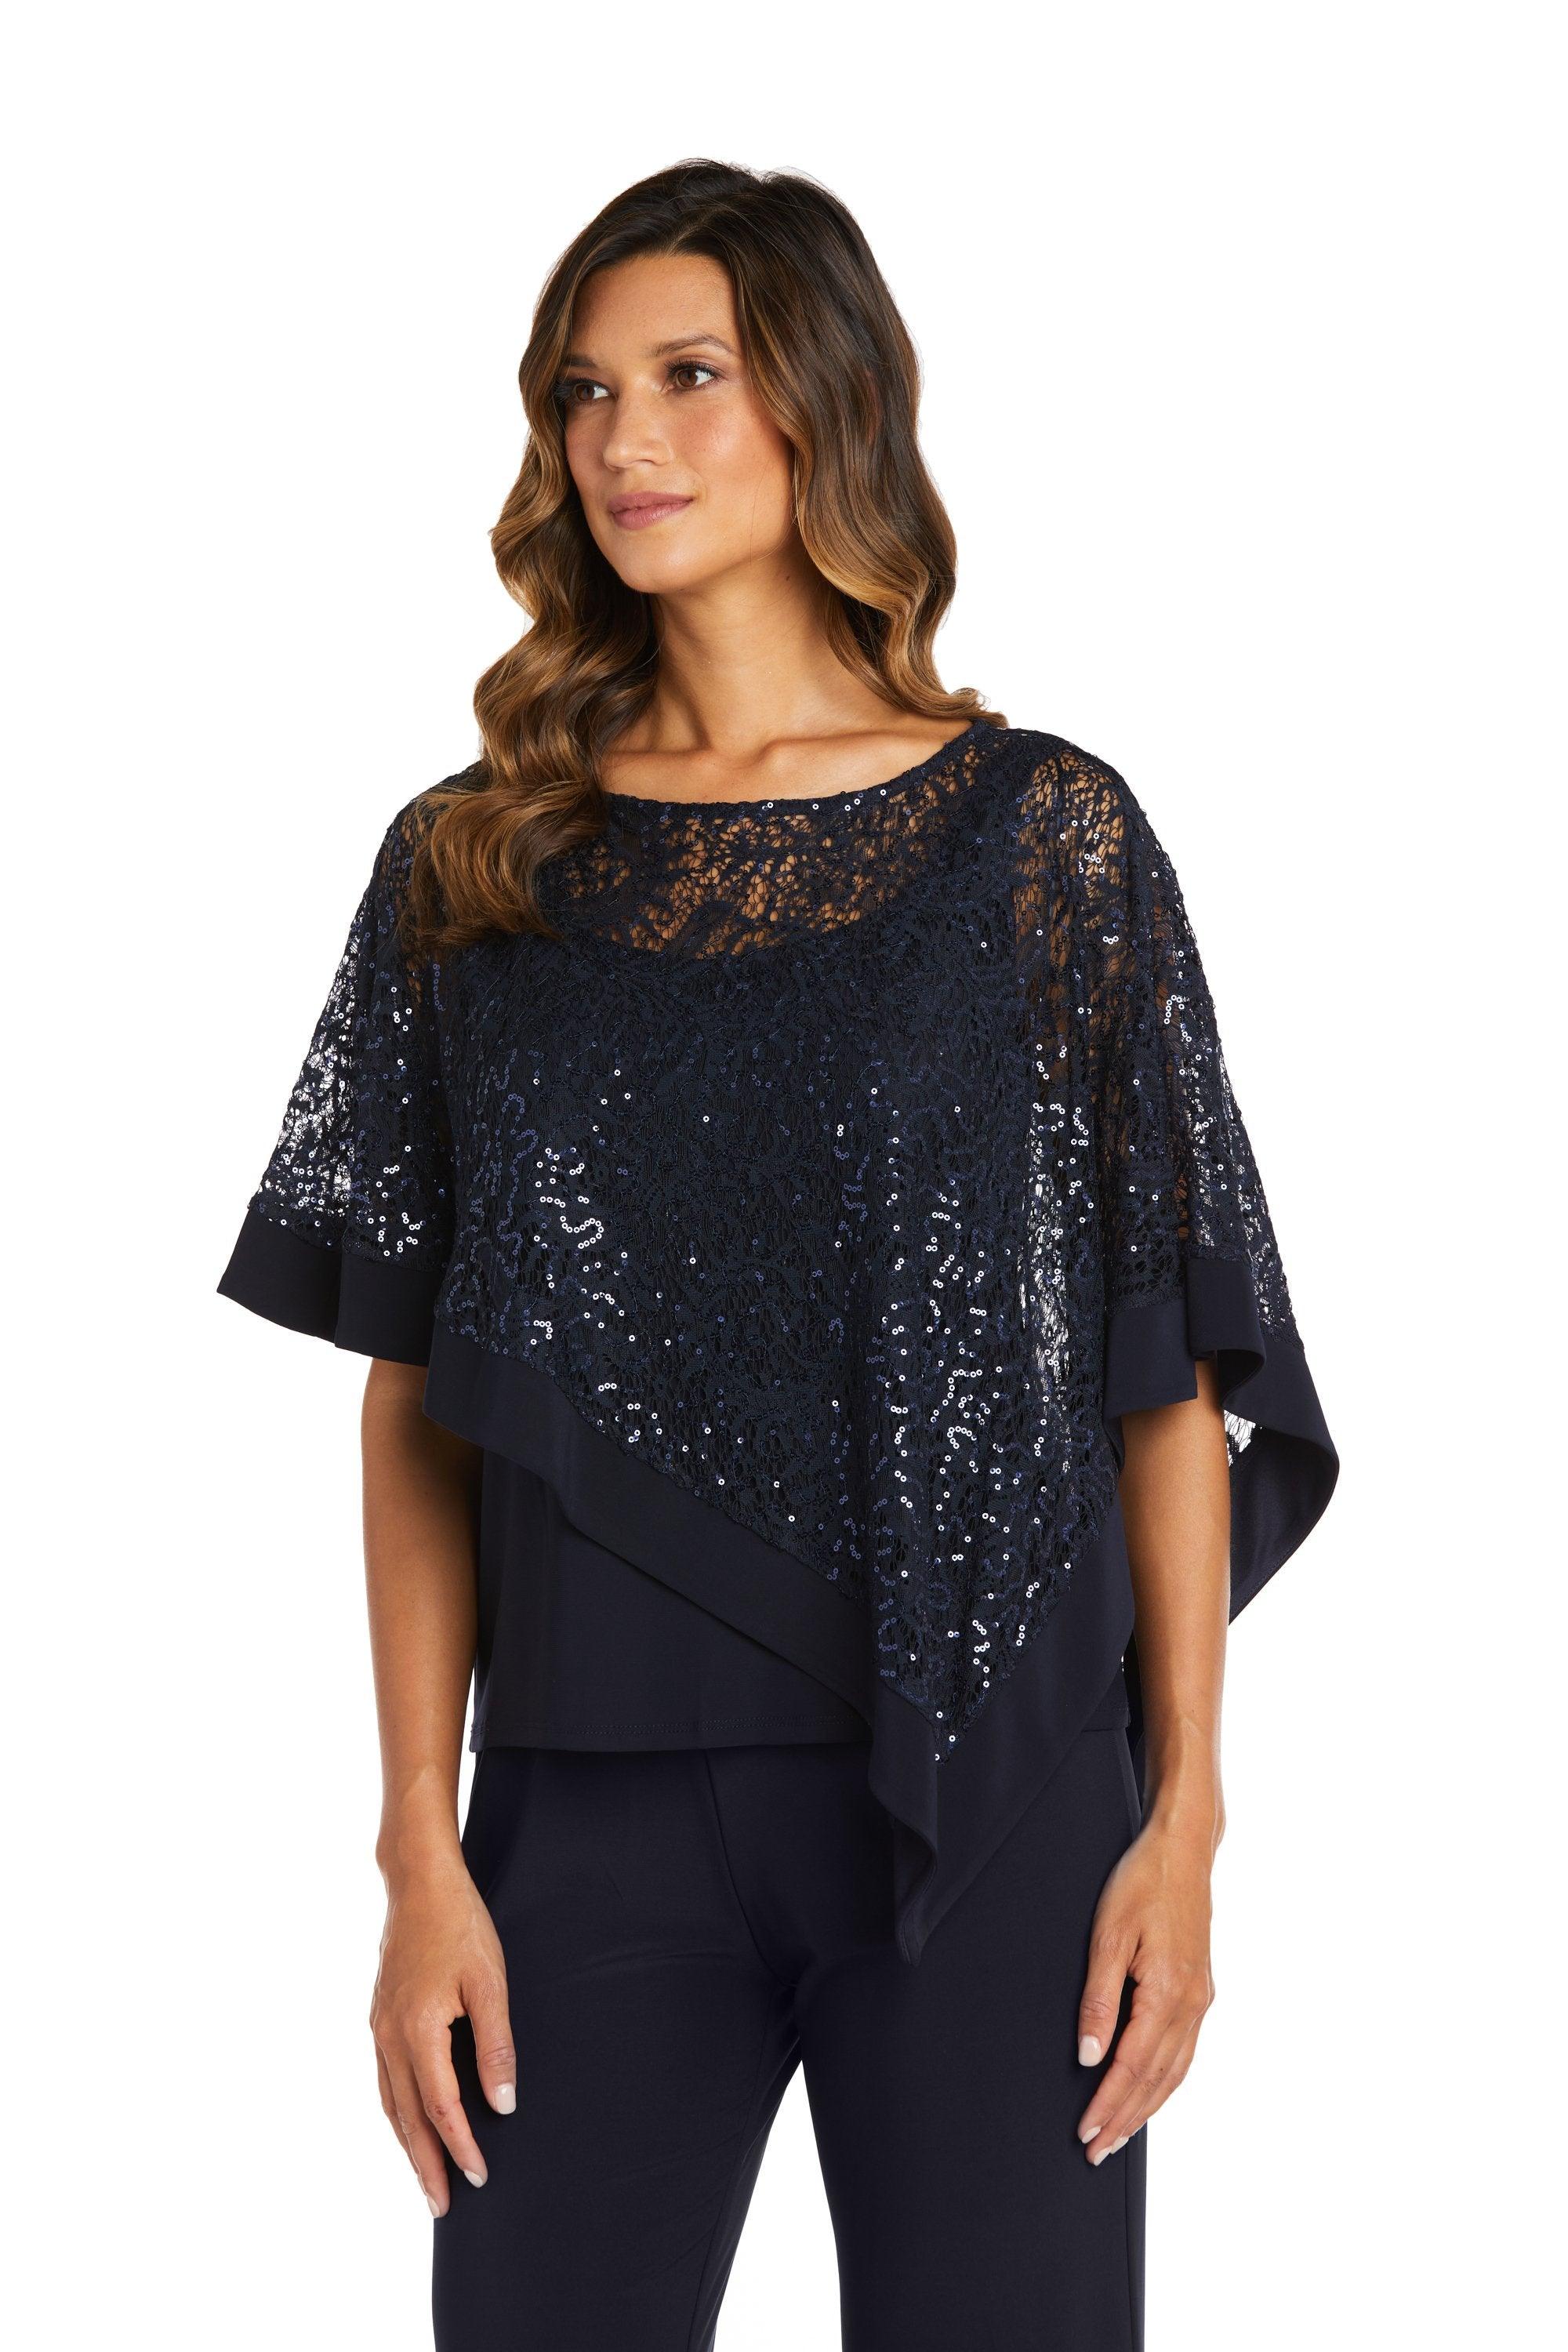 Navy R&M Richards 2117 Formal Lace Poncho Top for $66.99 – The Dress Outlet